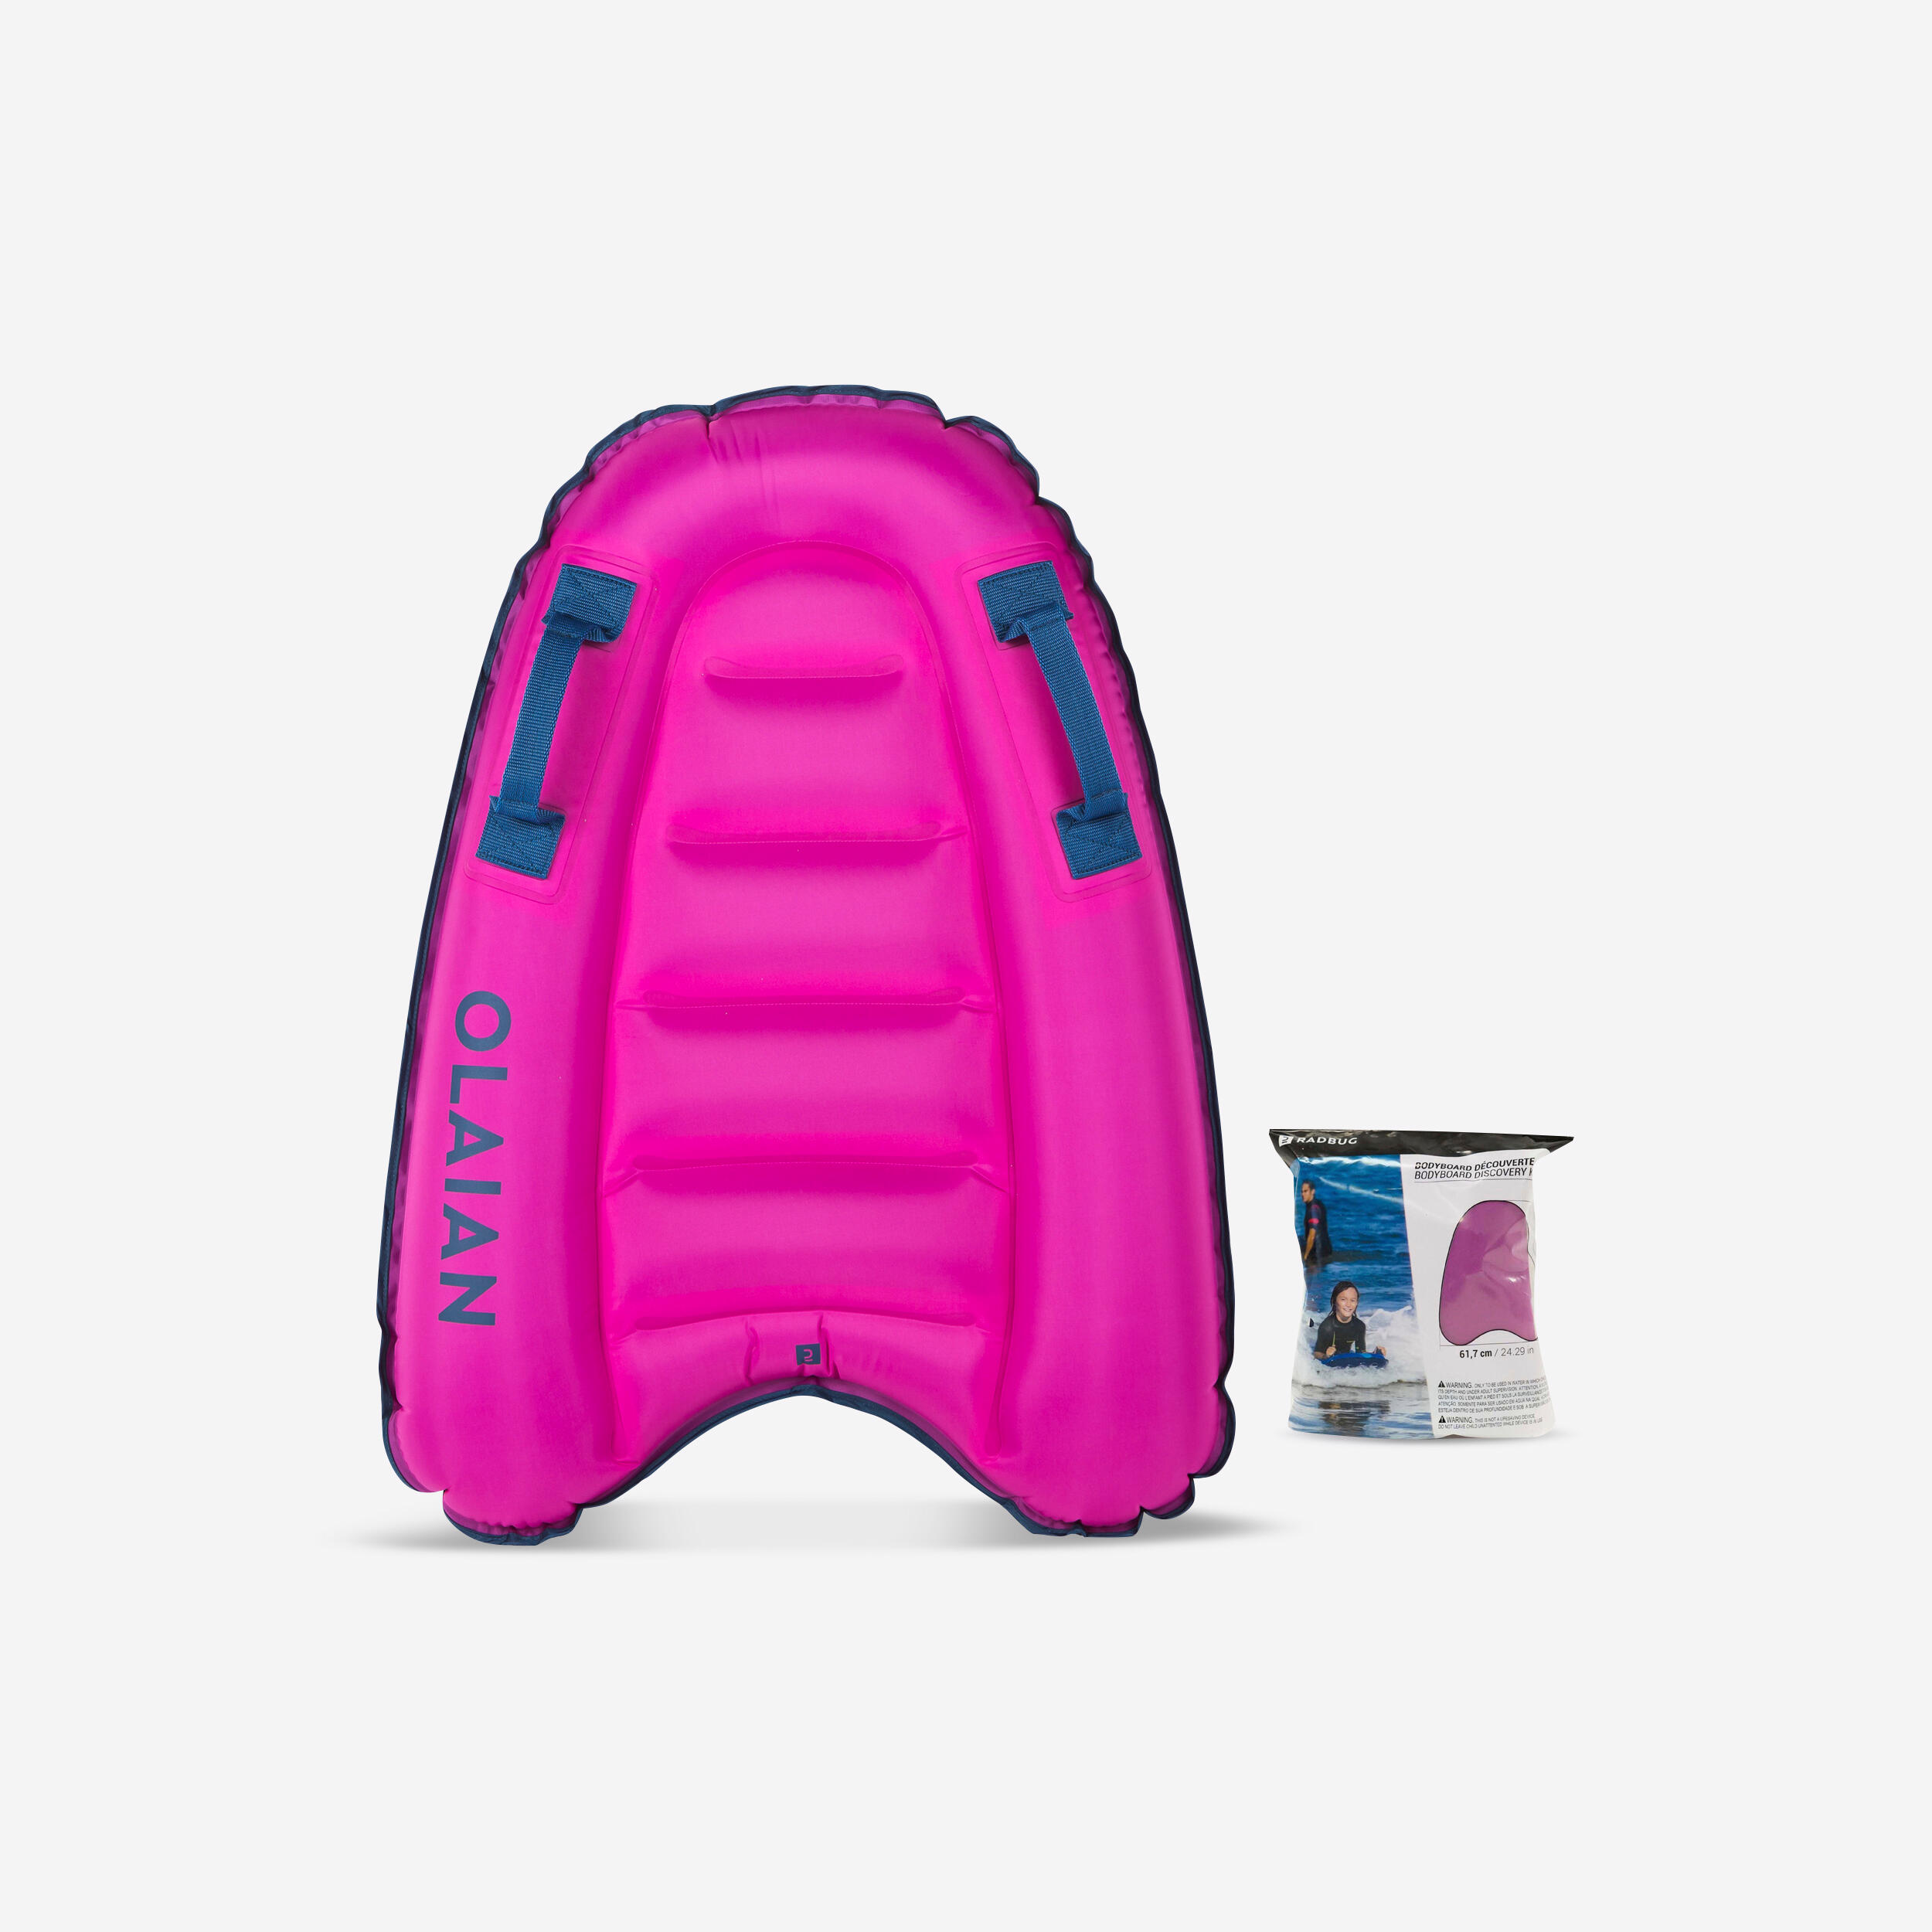 OLAIAN Kid's inflatable bodyboard for 4-8 year-olds (15-25 kg) - pink